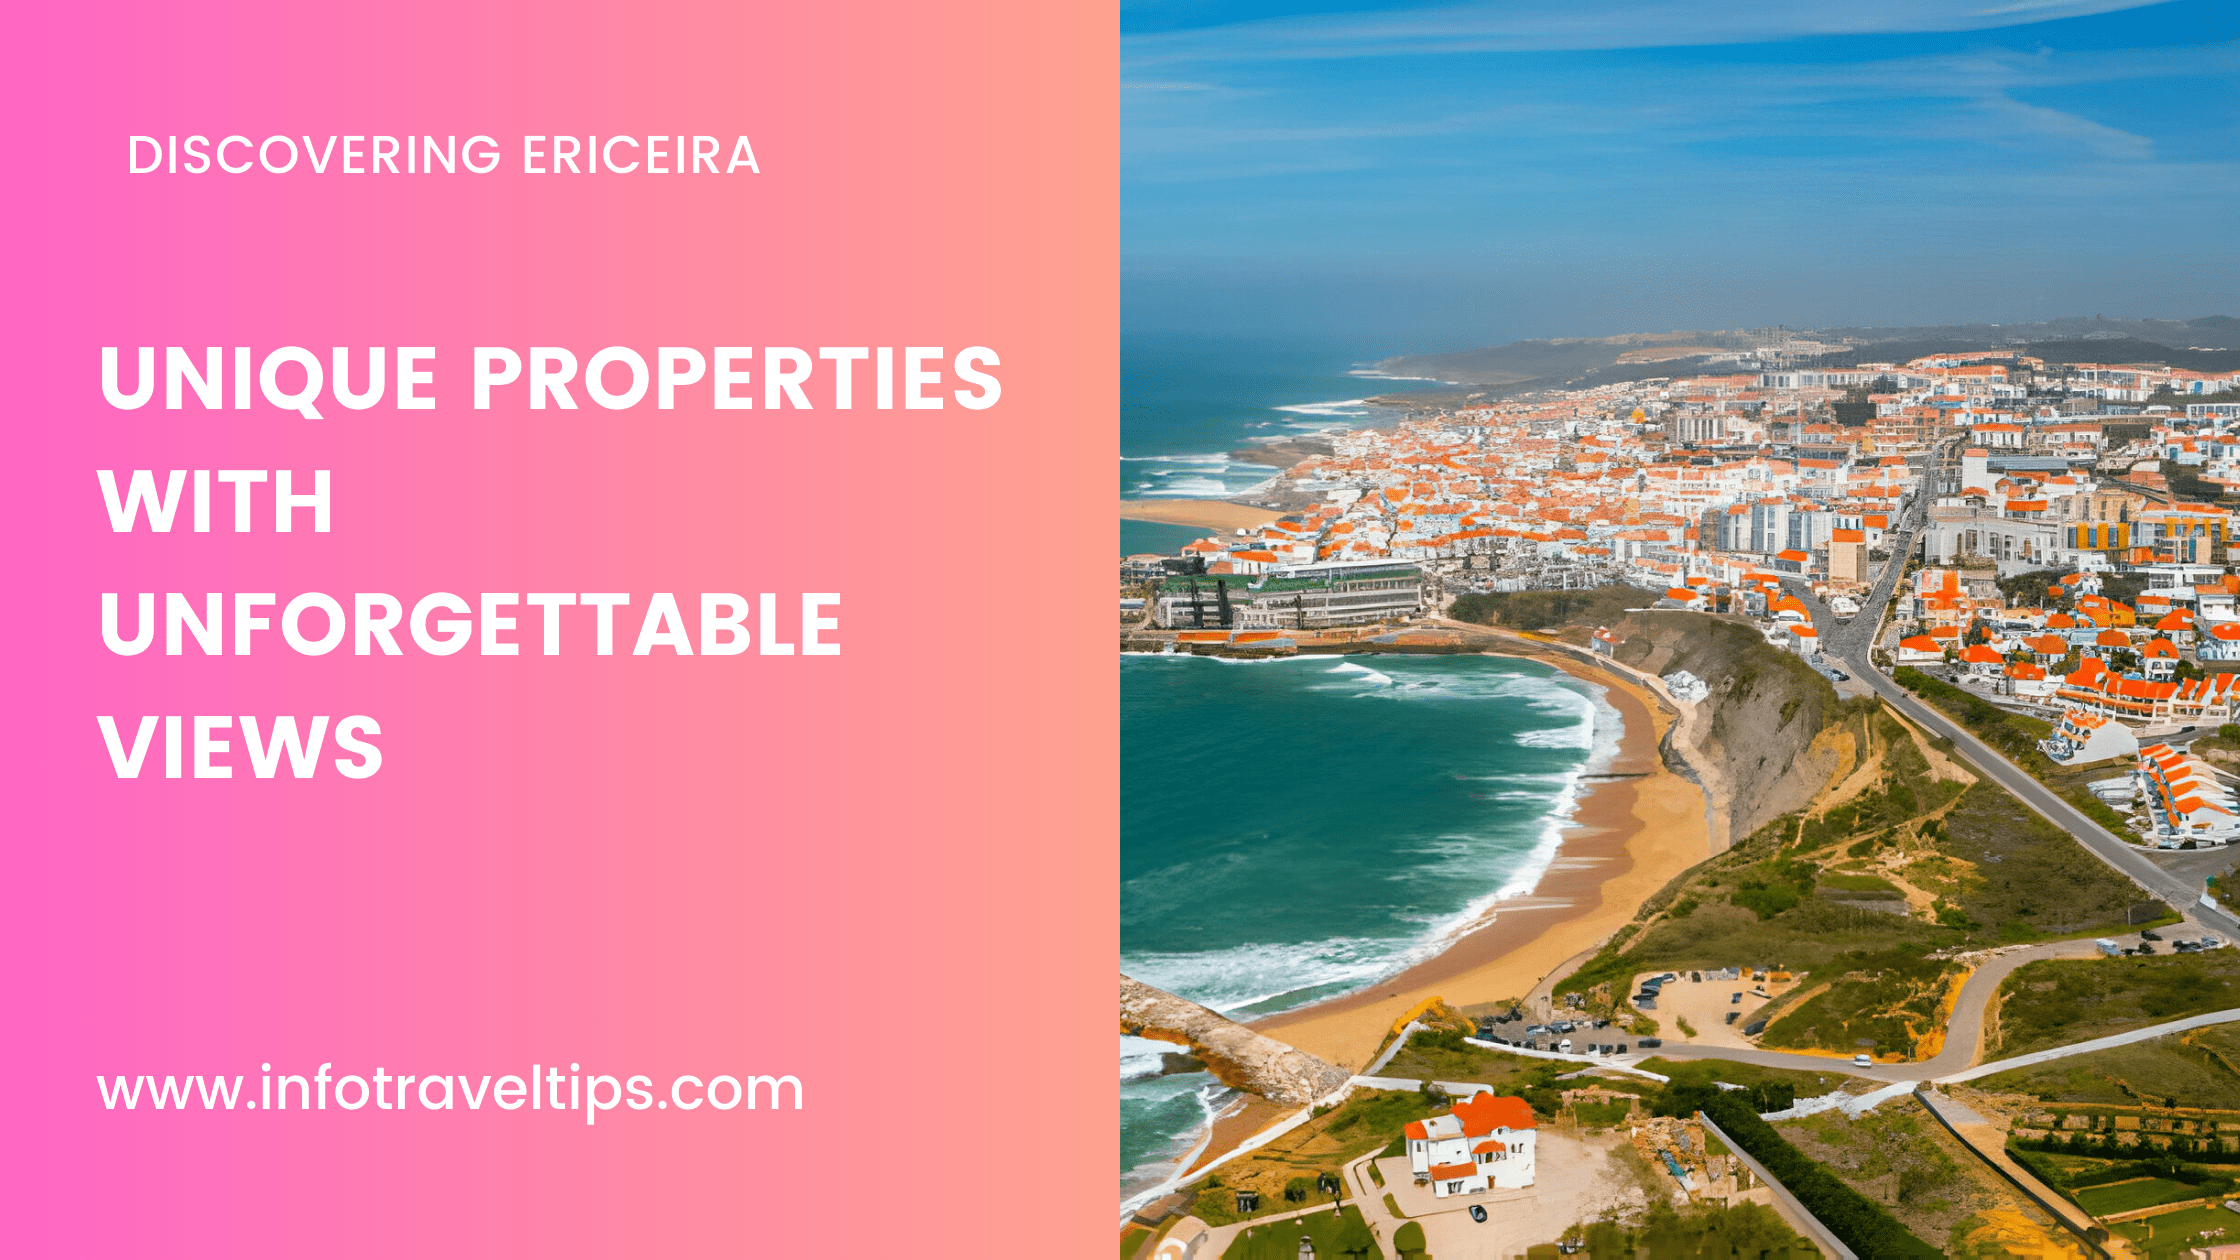 Ericeira’s Best: Sea View Accommodations for Every Budget